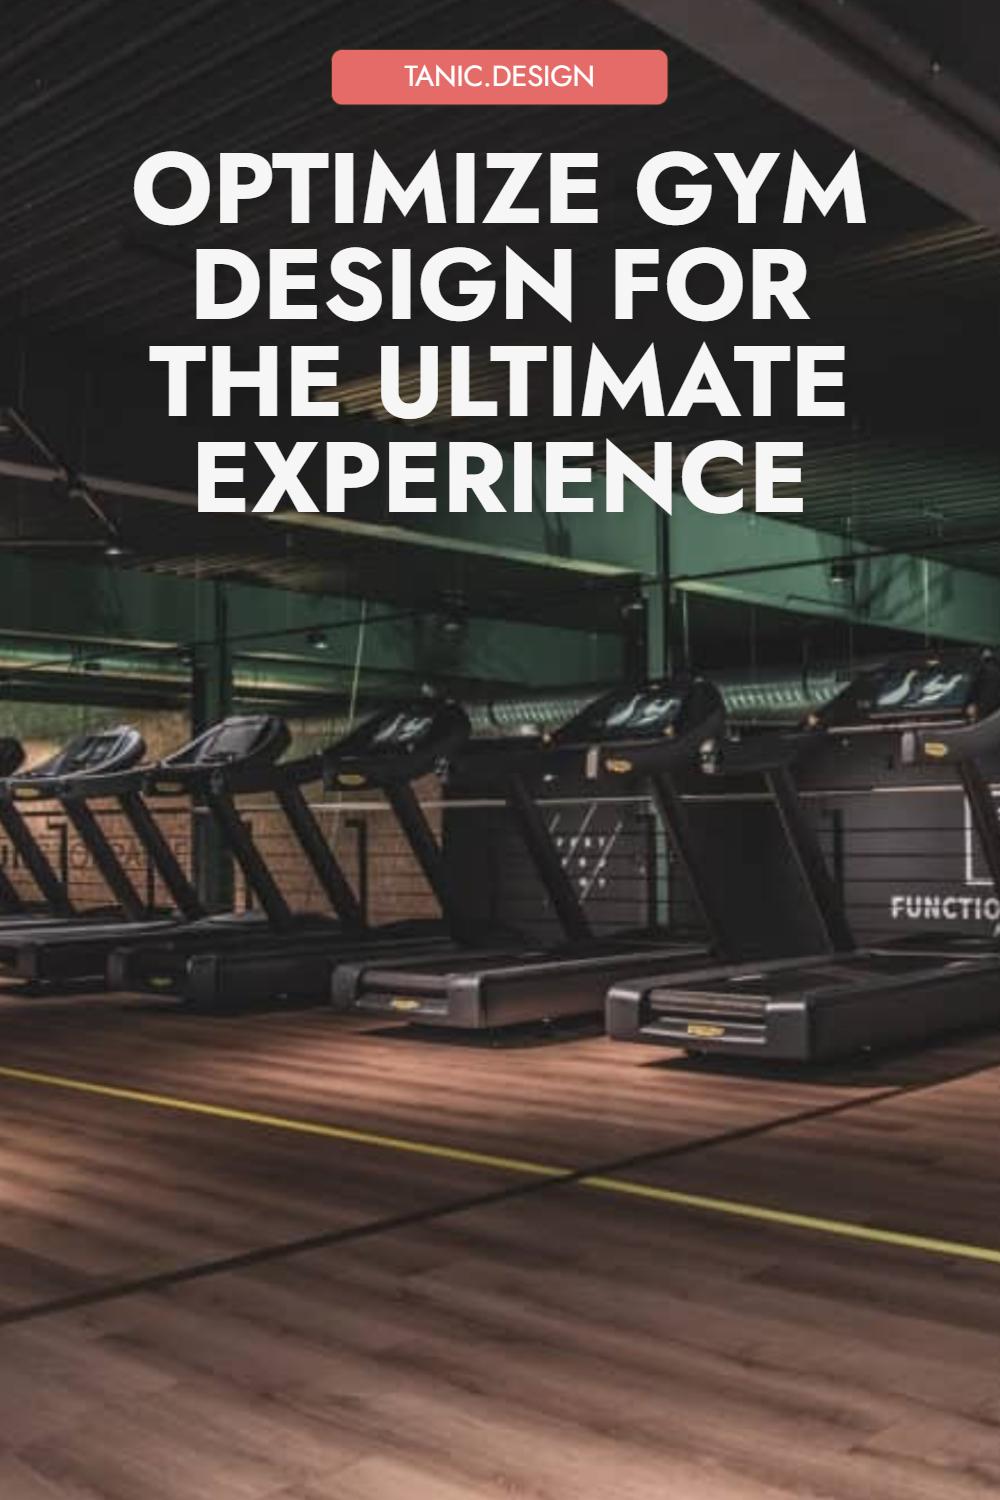 Designing gyms for the ultimate member experience.